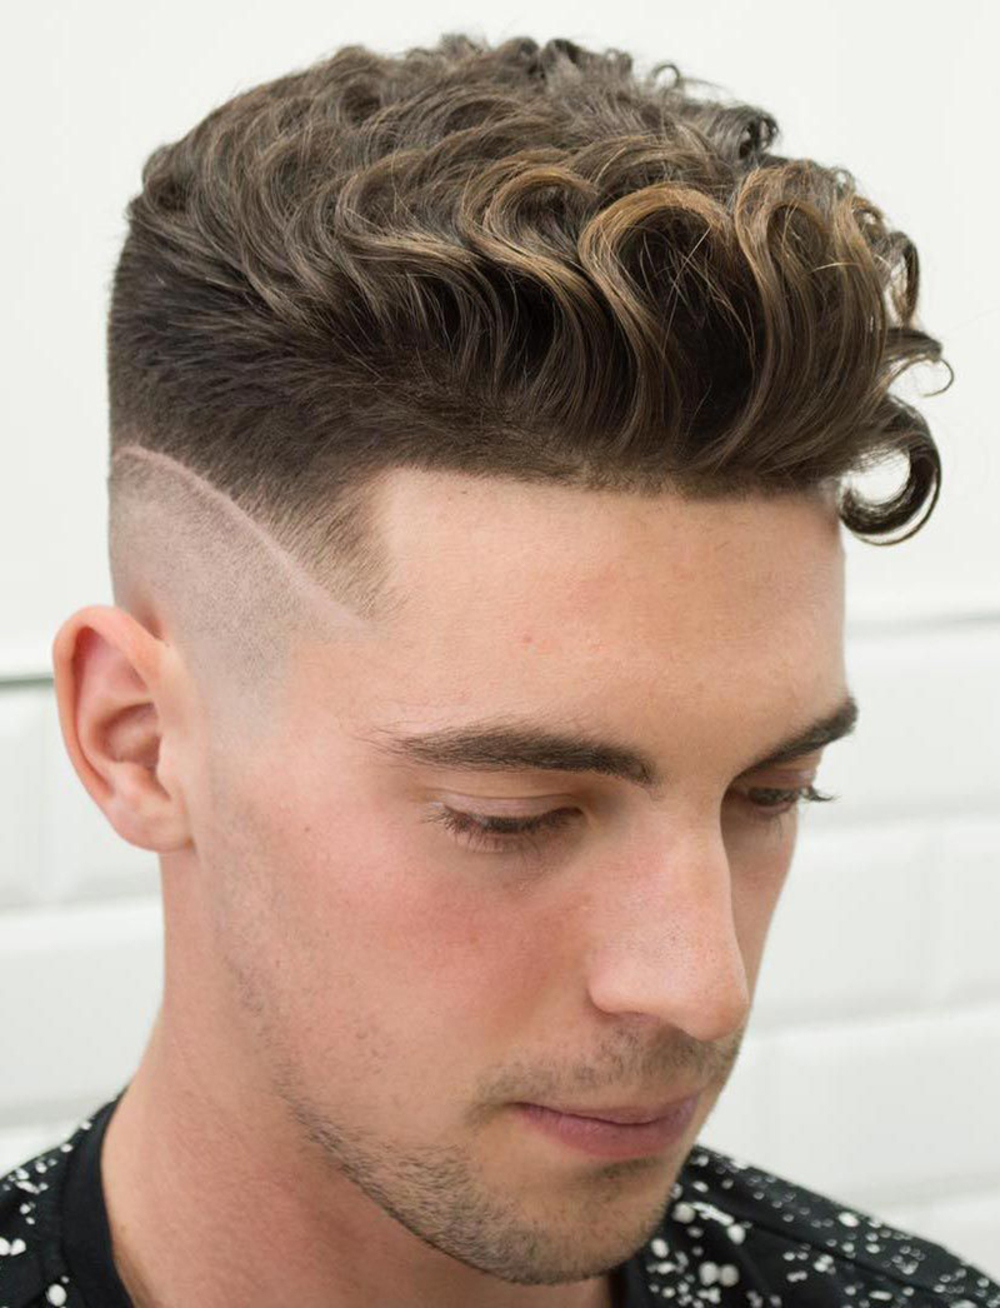 26 Sassy Hairstyles For Men With Curly Hair